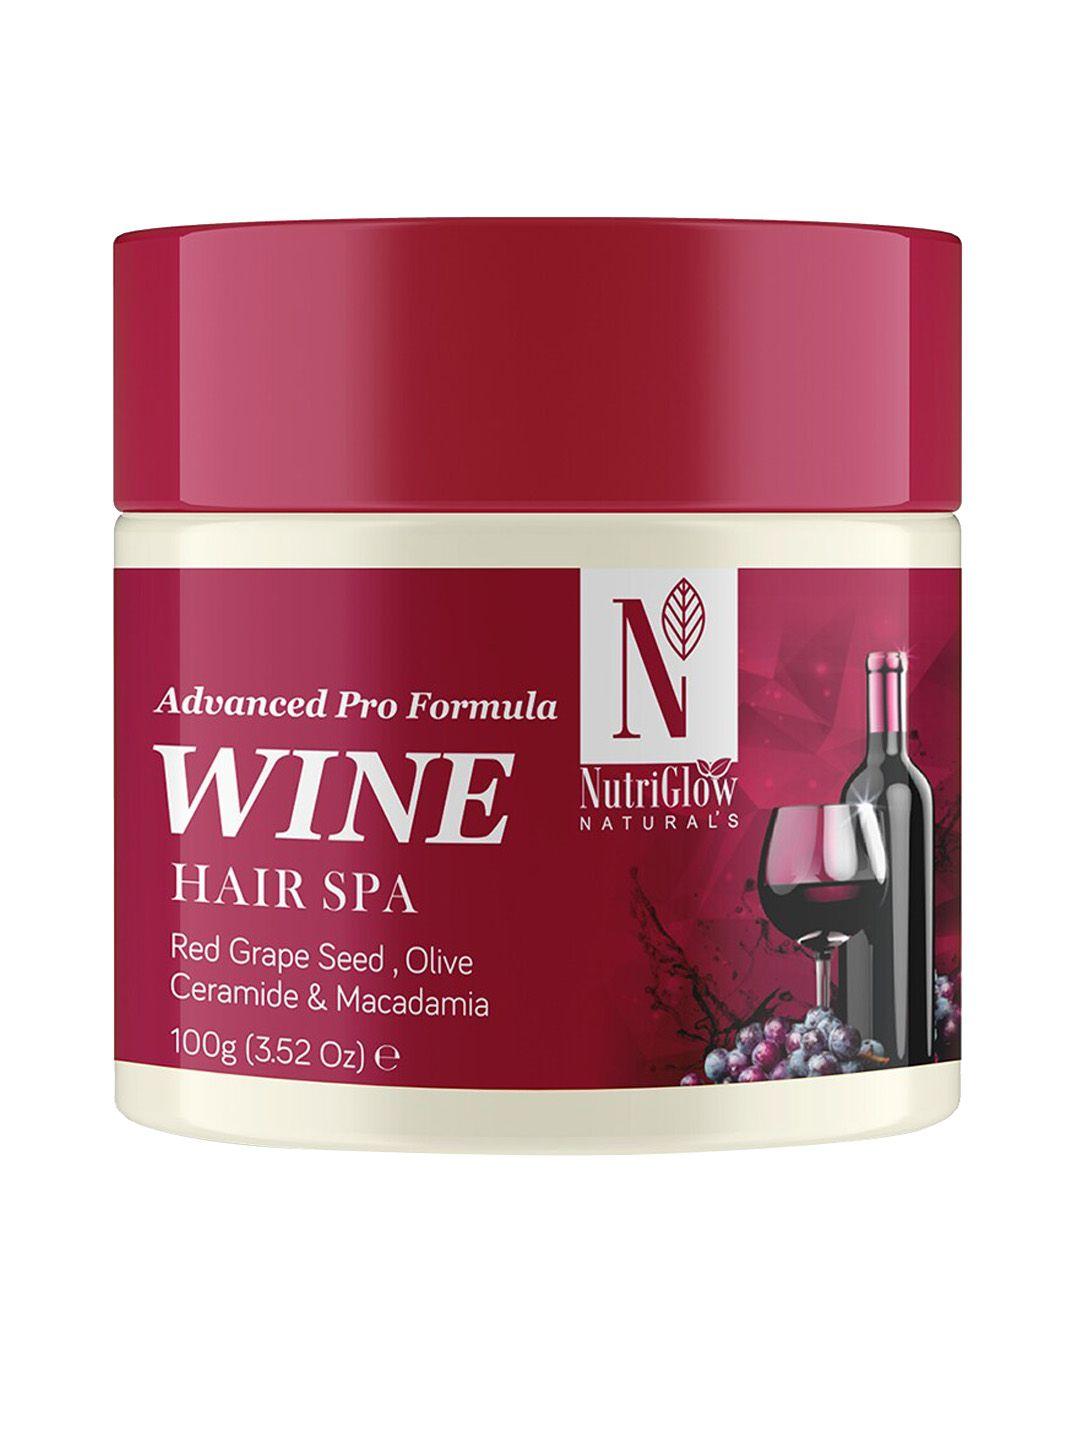 nutriglow naturals advanced pro formula wine hair spa with red grape seed - 100 g